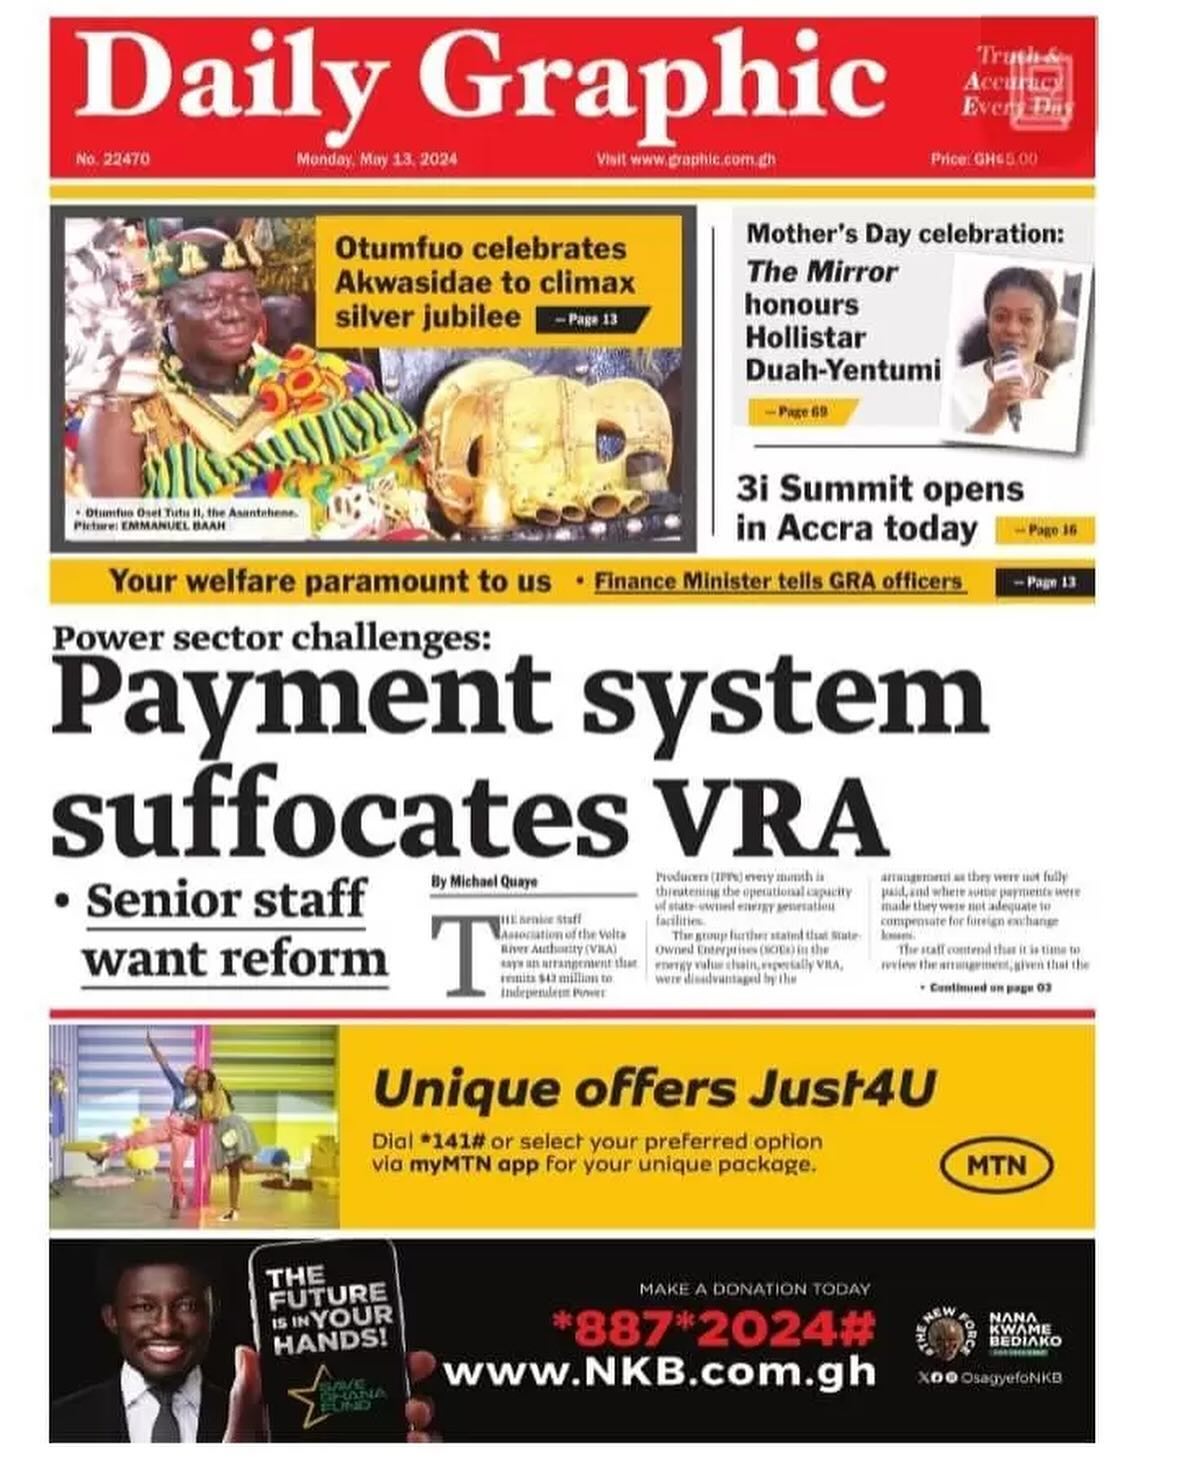 Daily Graphic Newspaper - May 13, 2024